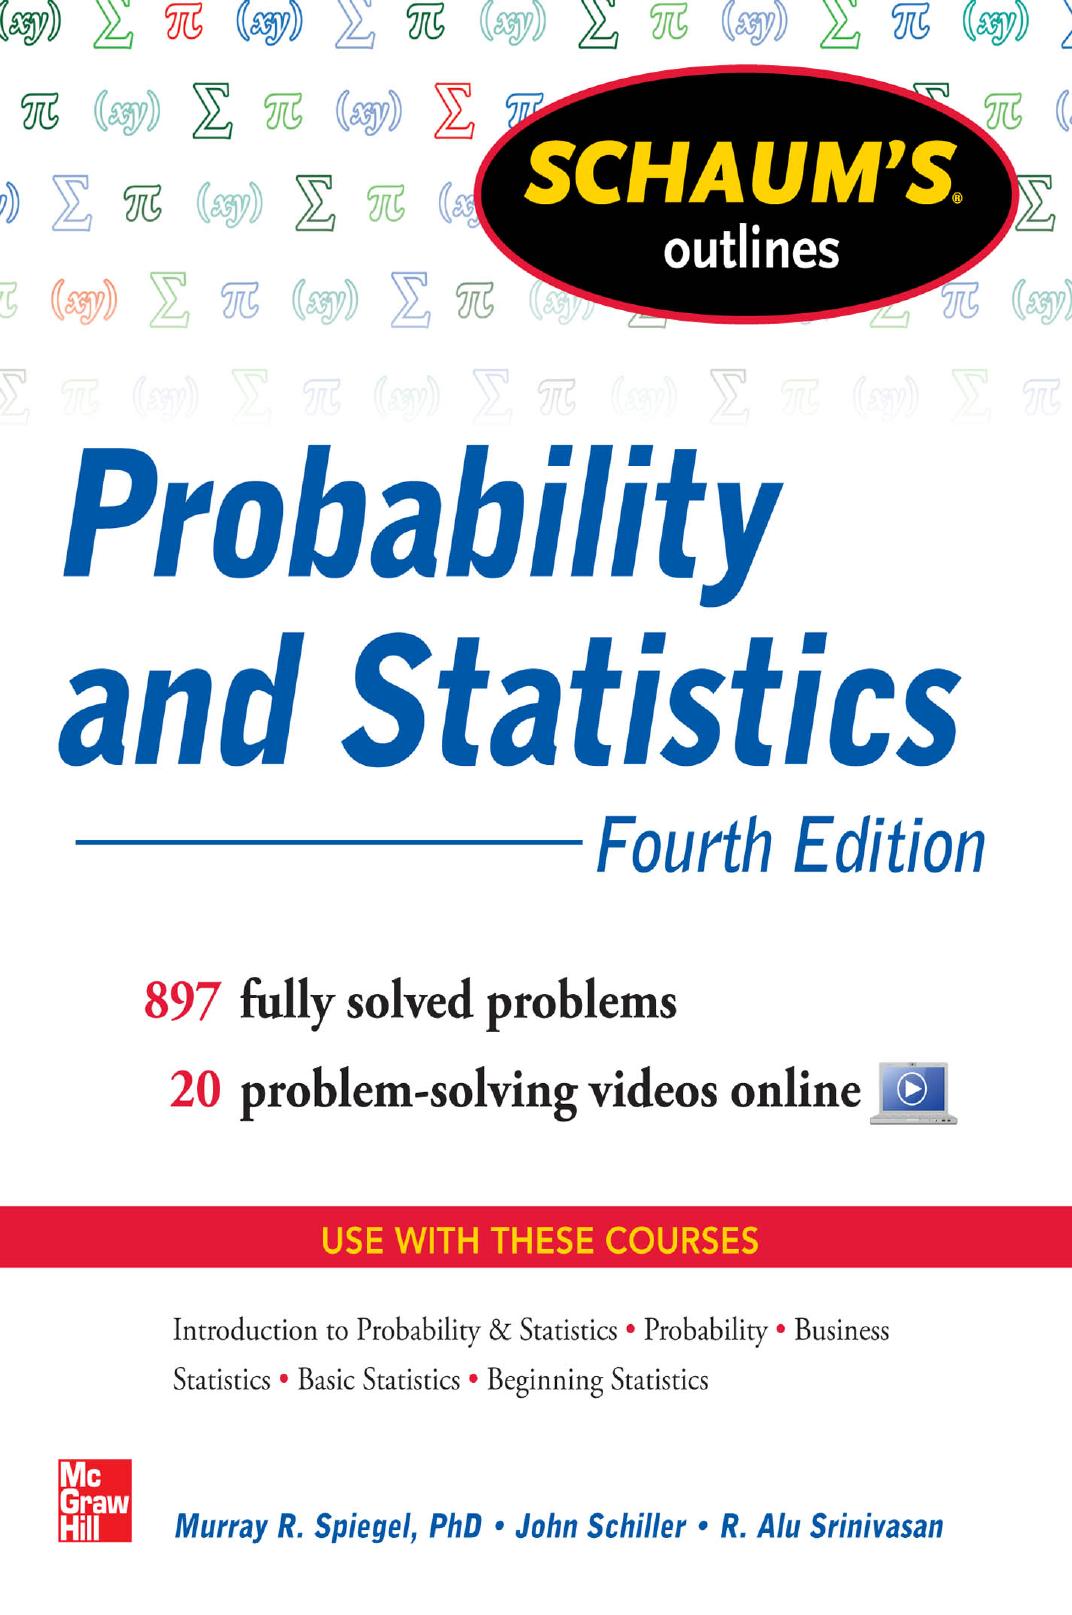 Schaum's Outlines of Probability and Statistics